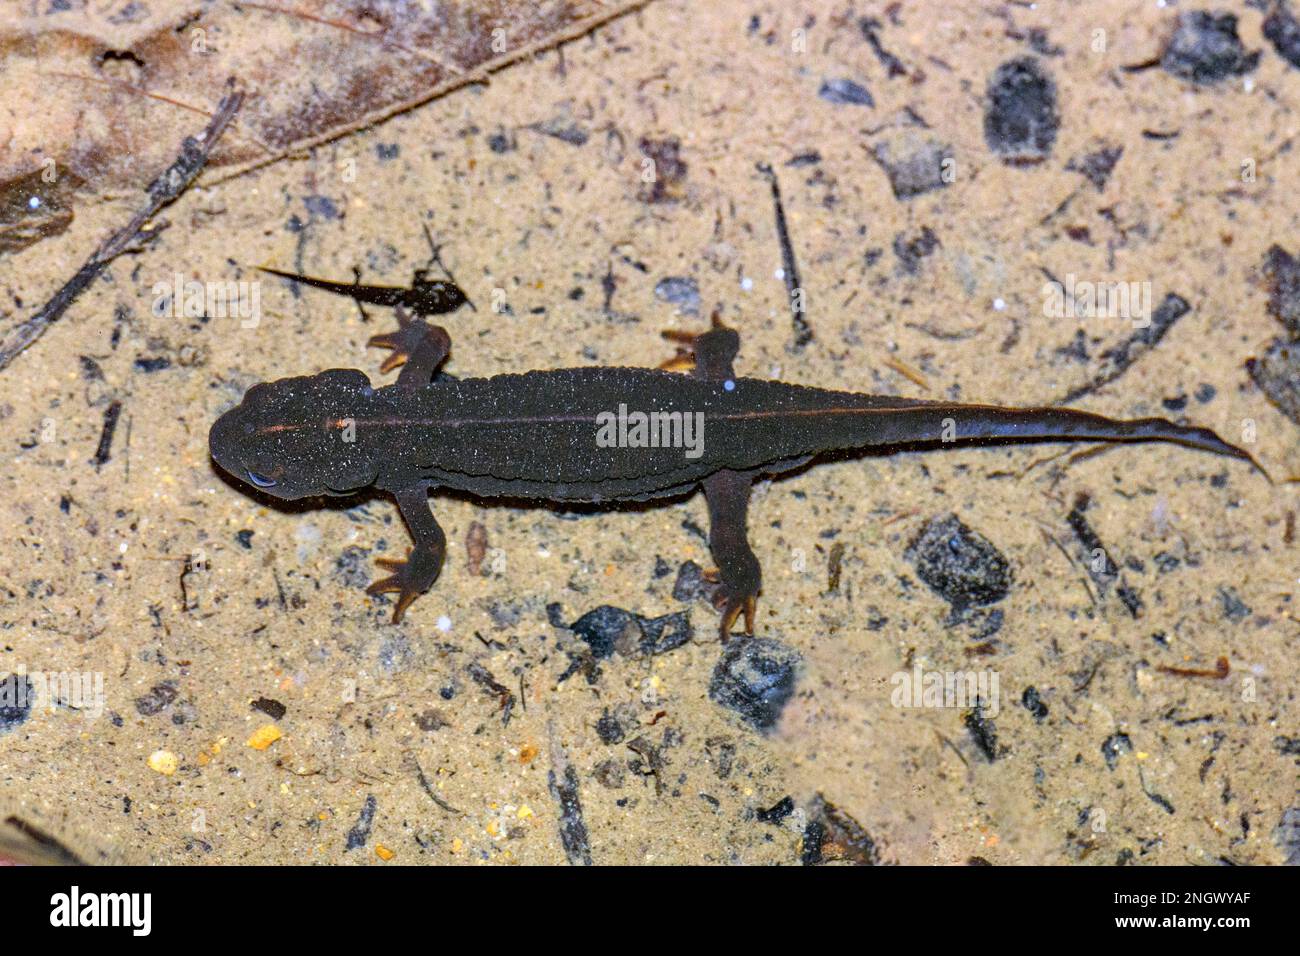 Sword-tailed newt (Cynops ensicauda) from Amami Oshima, Japan. Do note the three juvenile salamander in the photo. Stock Photo